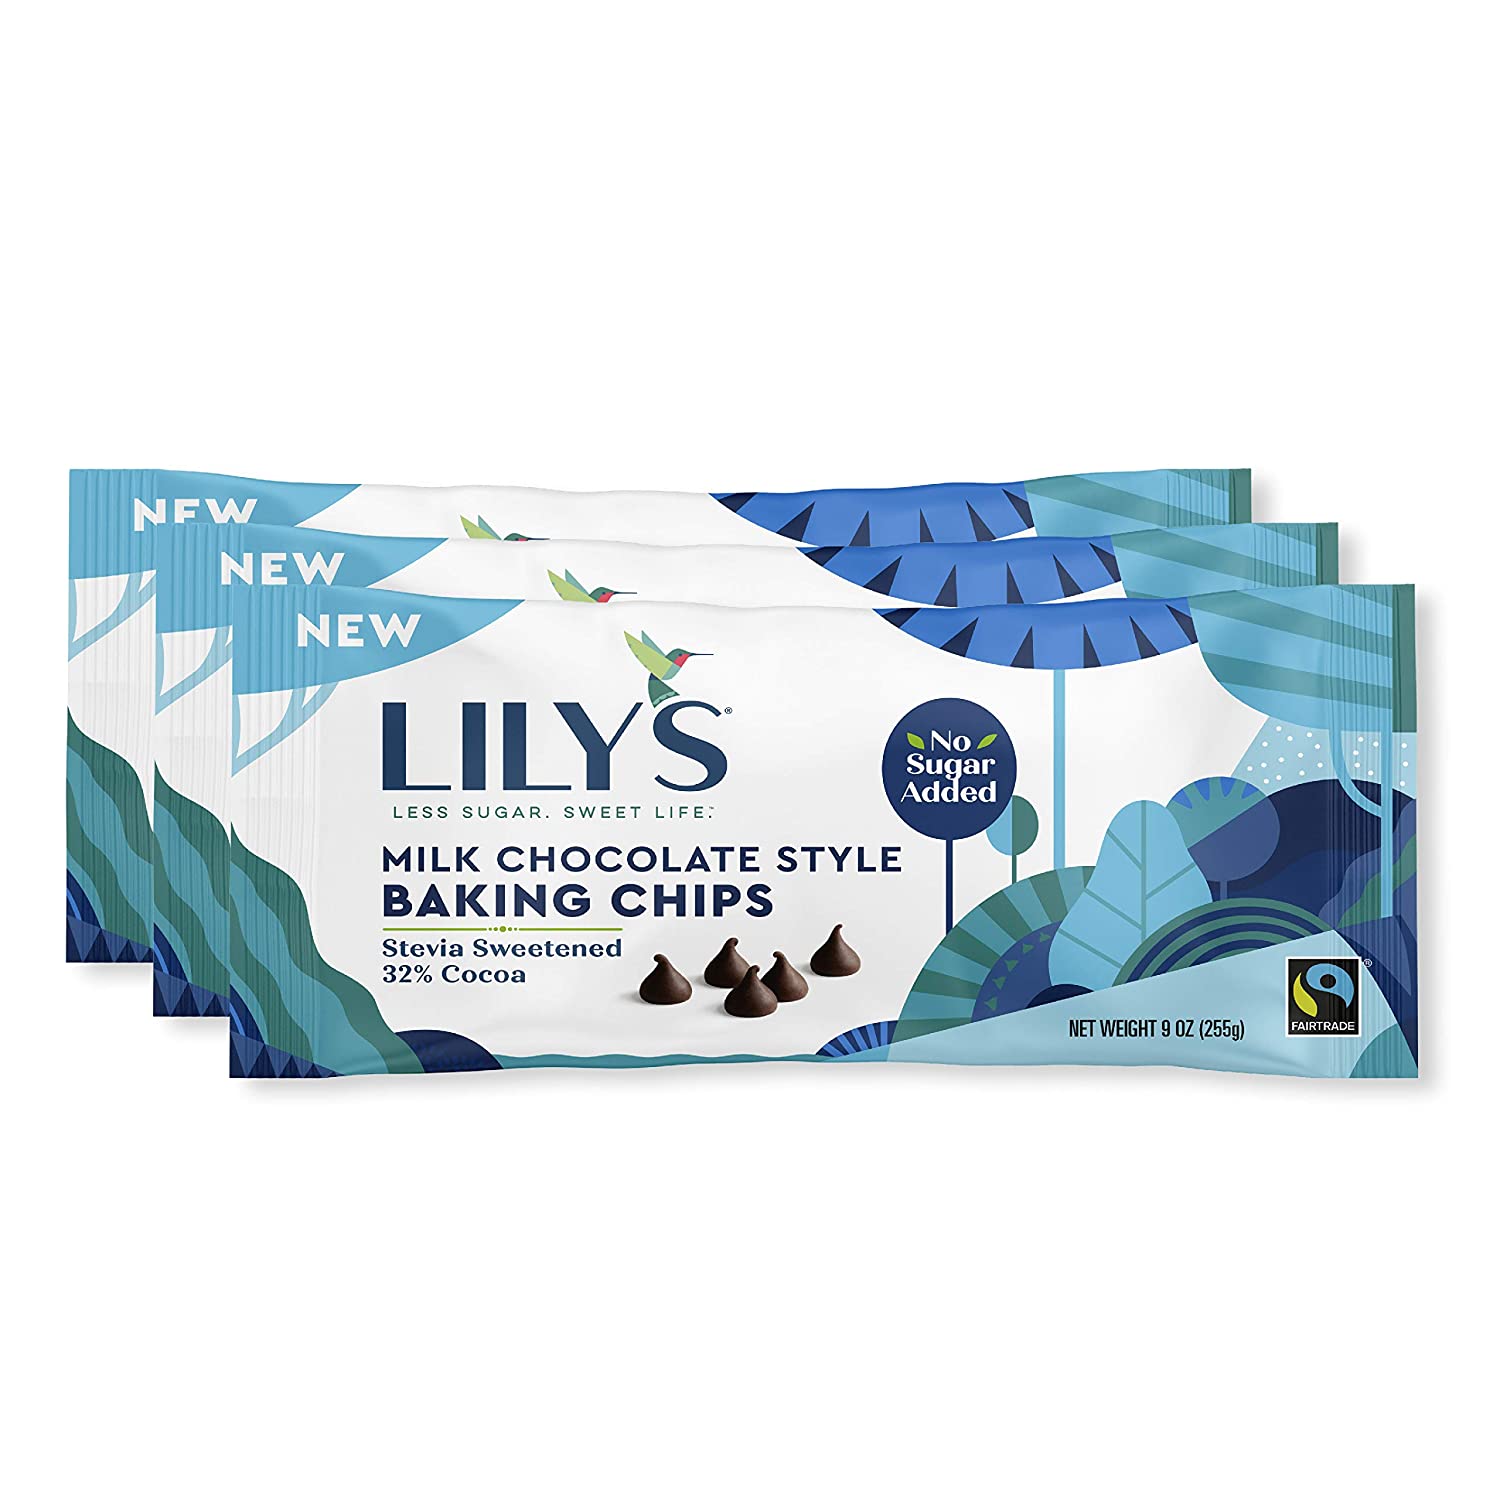 Lily's Milk Chocolate Chips